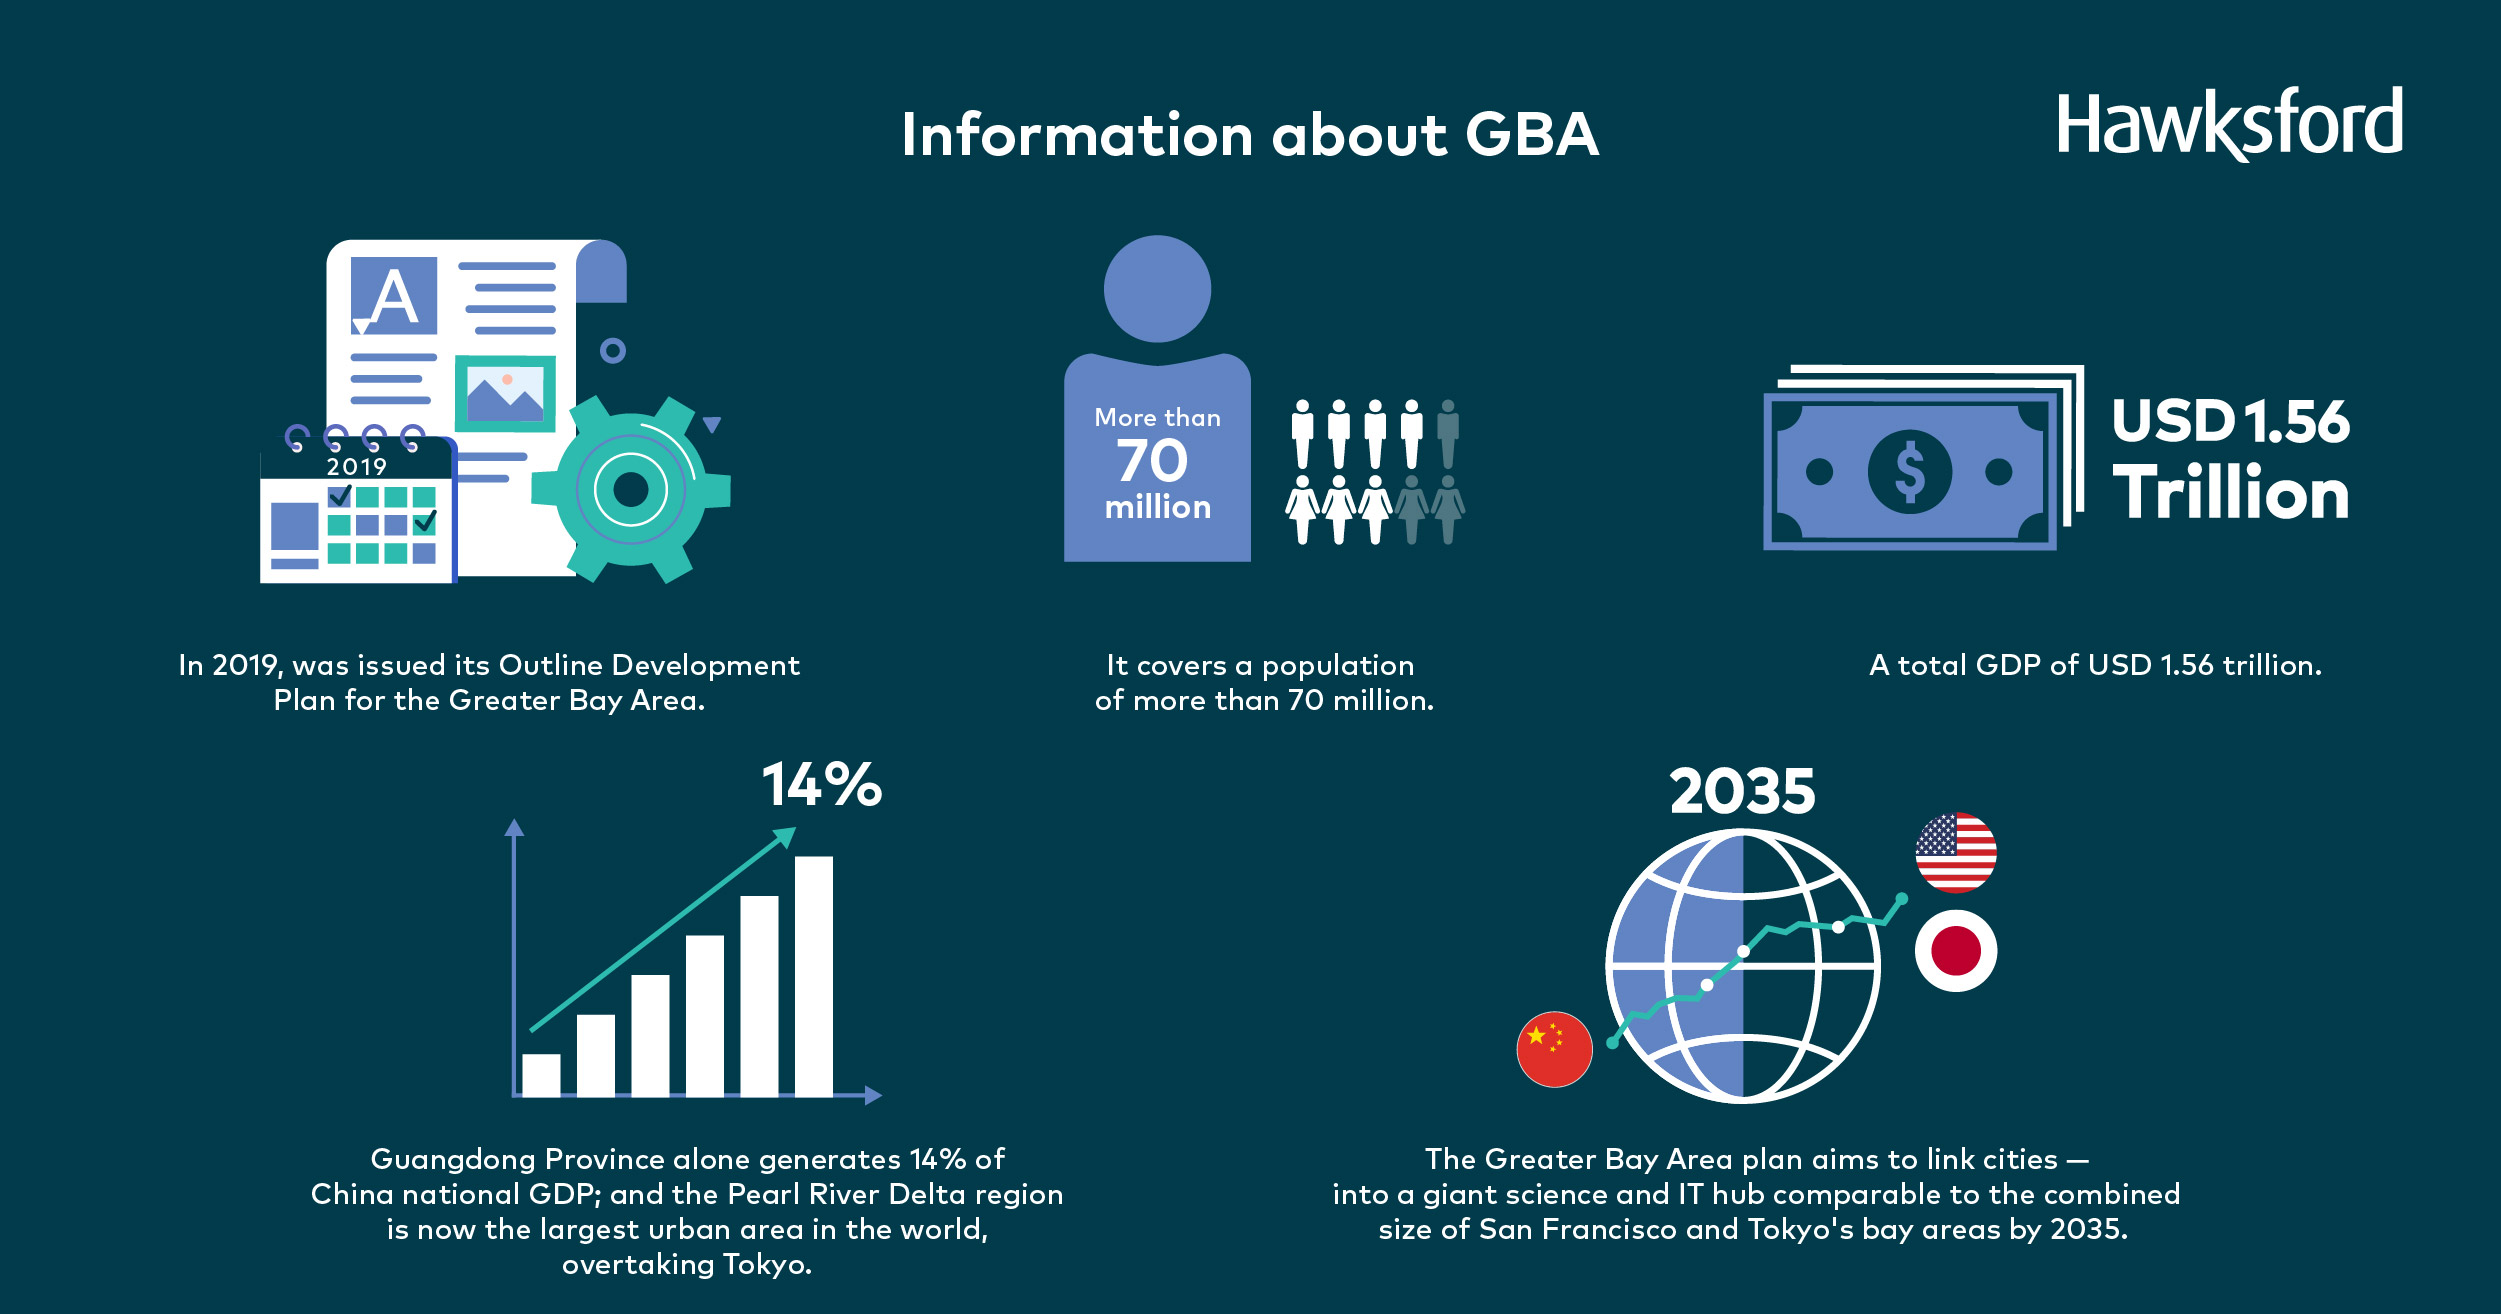 Information about GBA